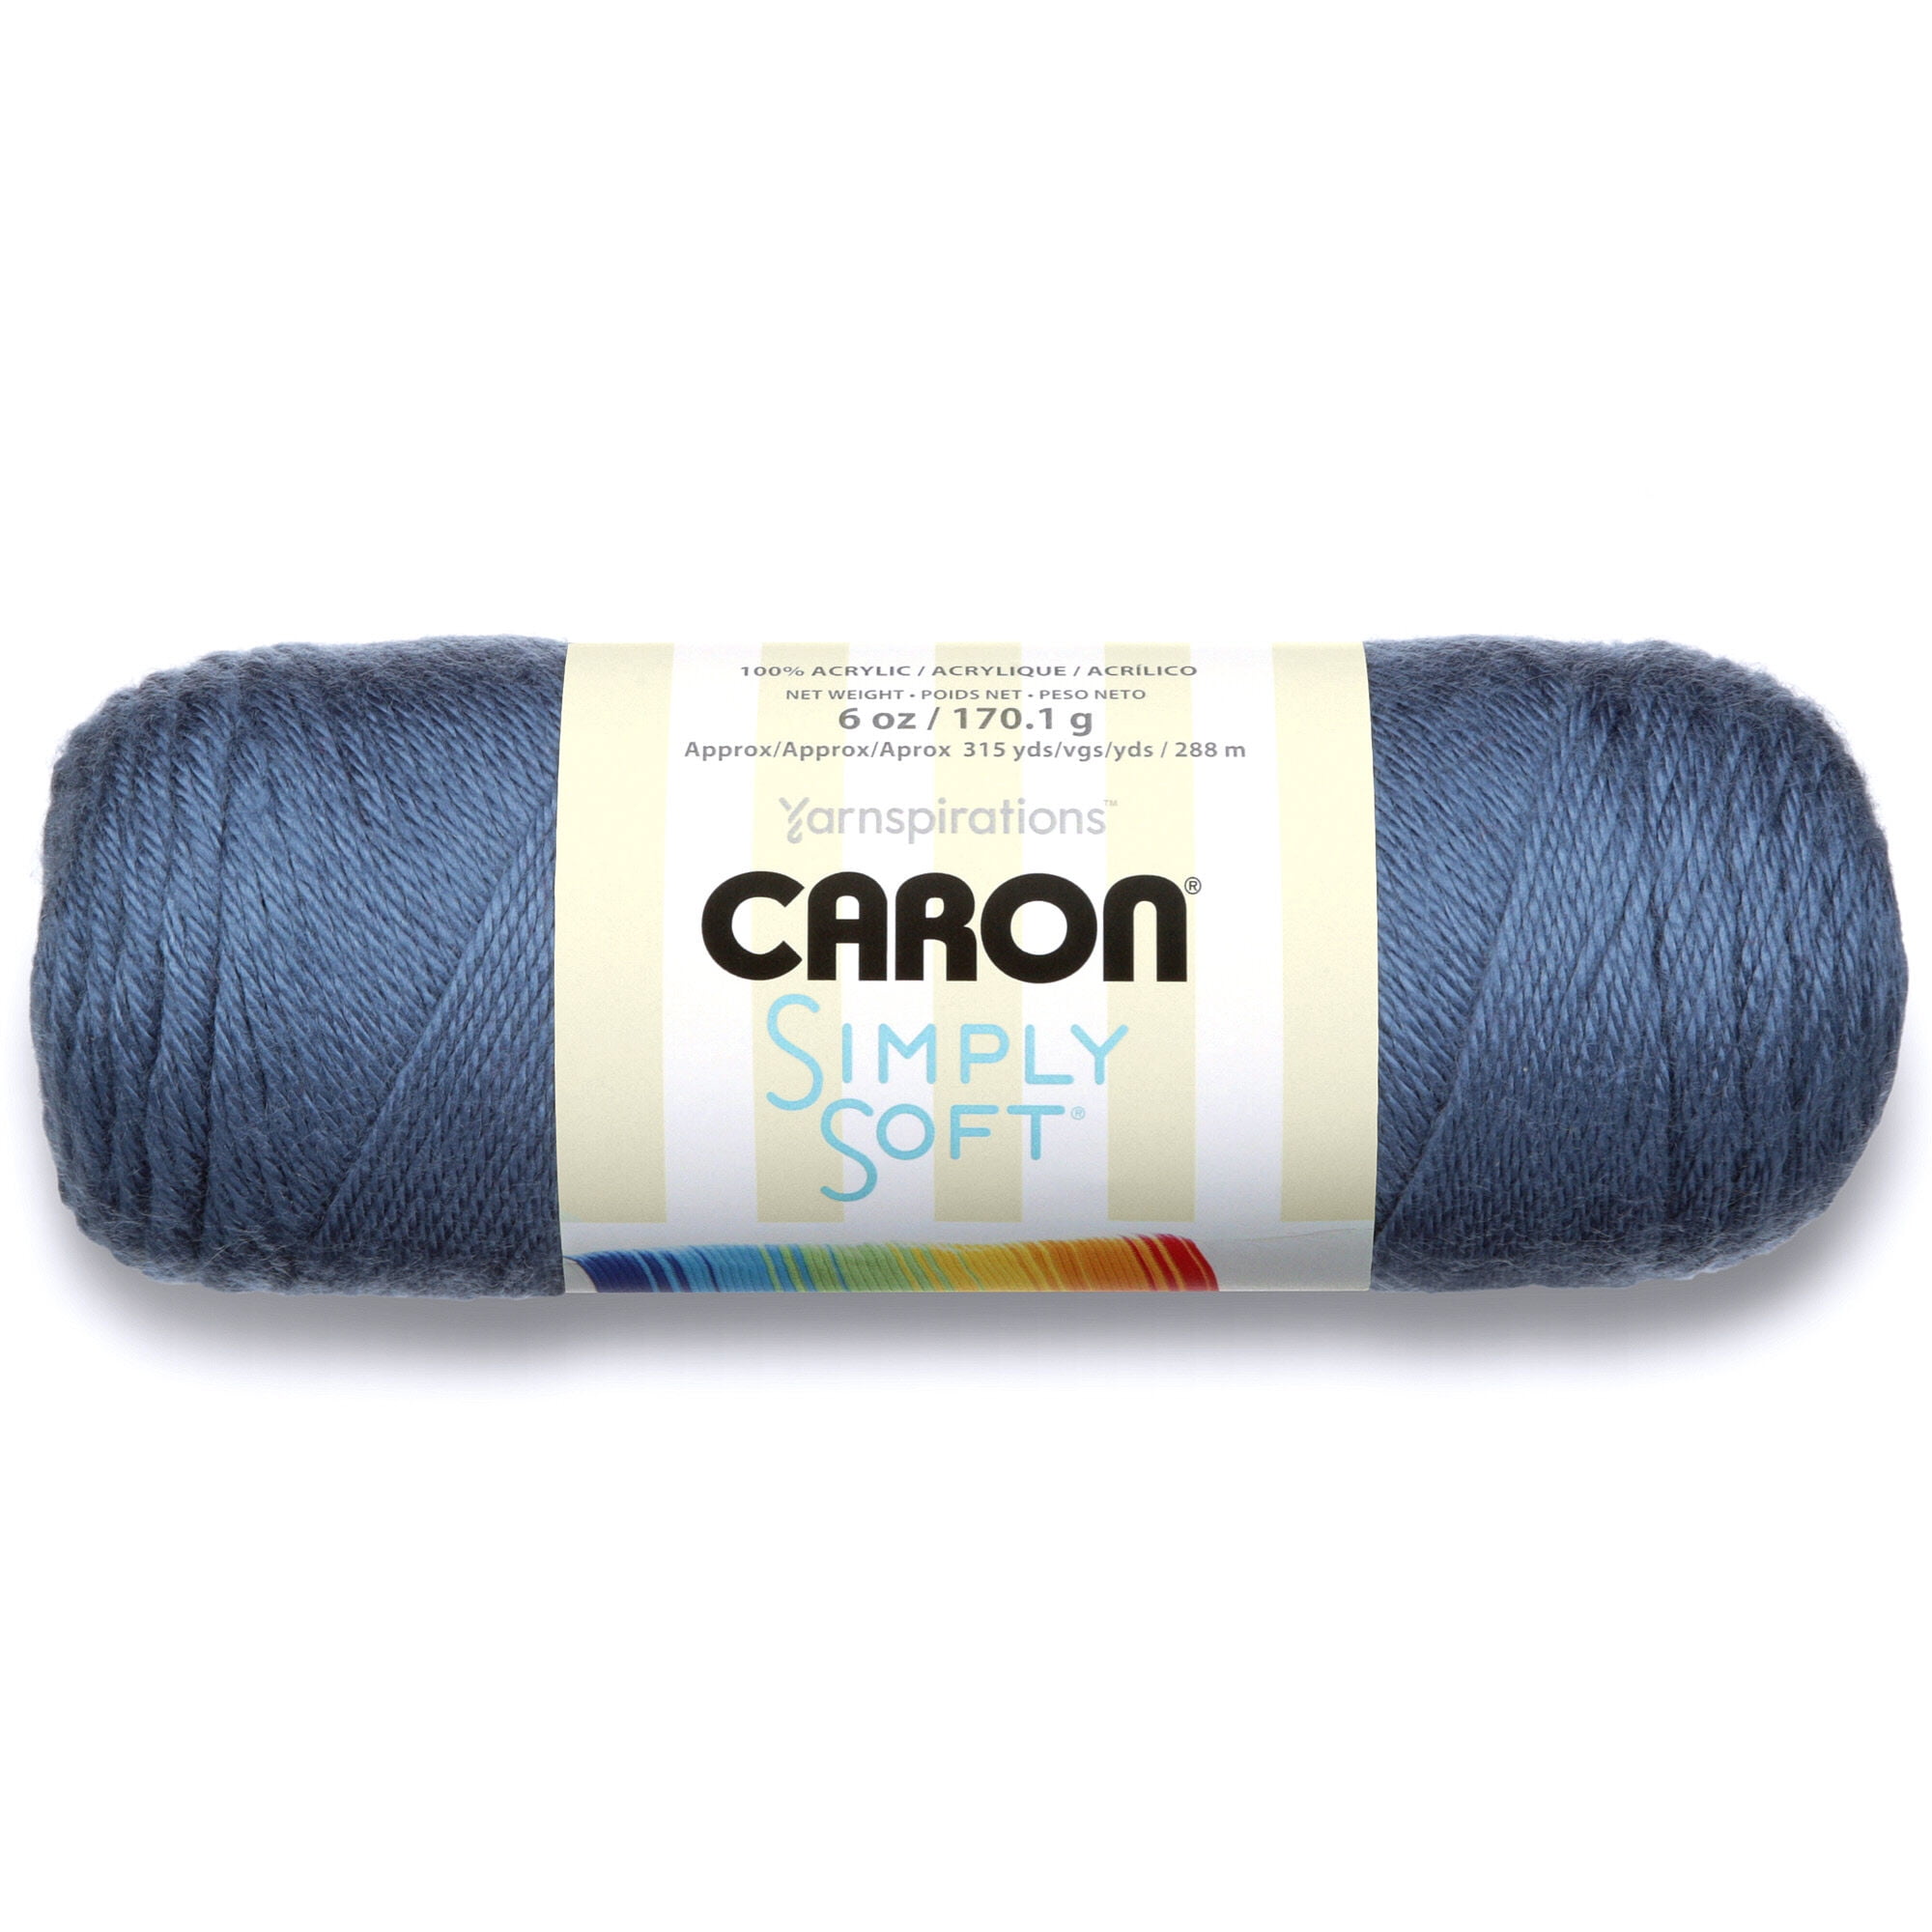 Caron Simply Soft-Pack of 2 Balls-170g Each Ball-Country Blue 